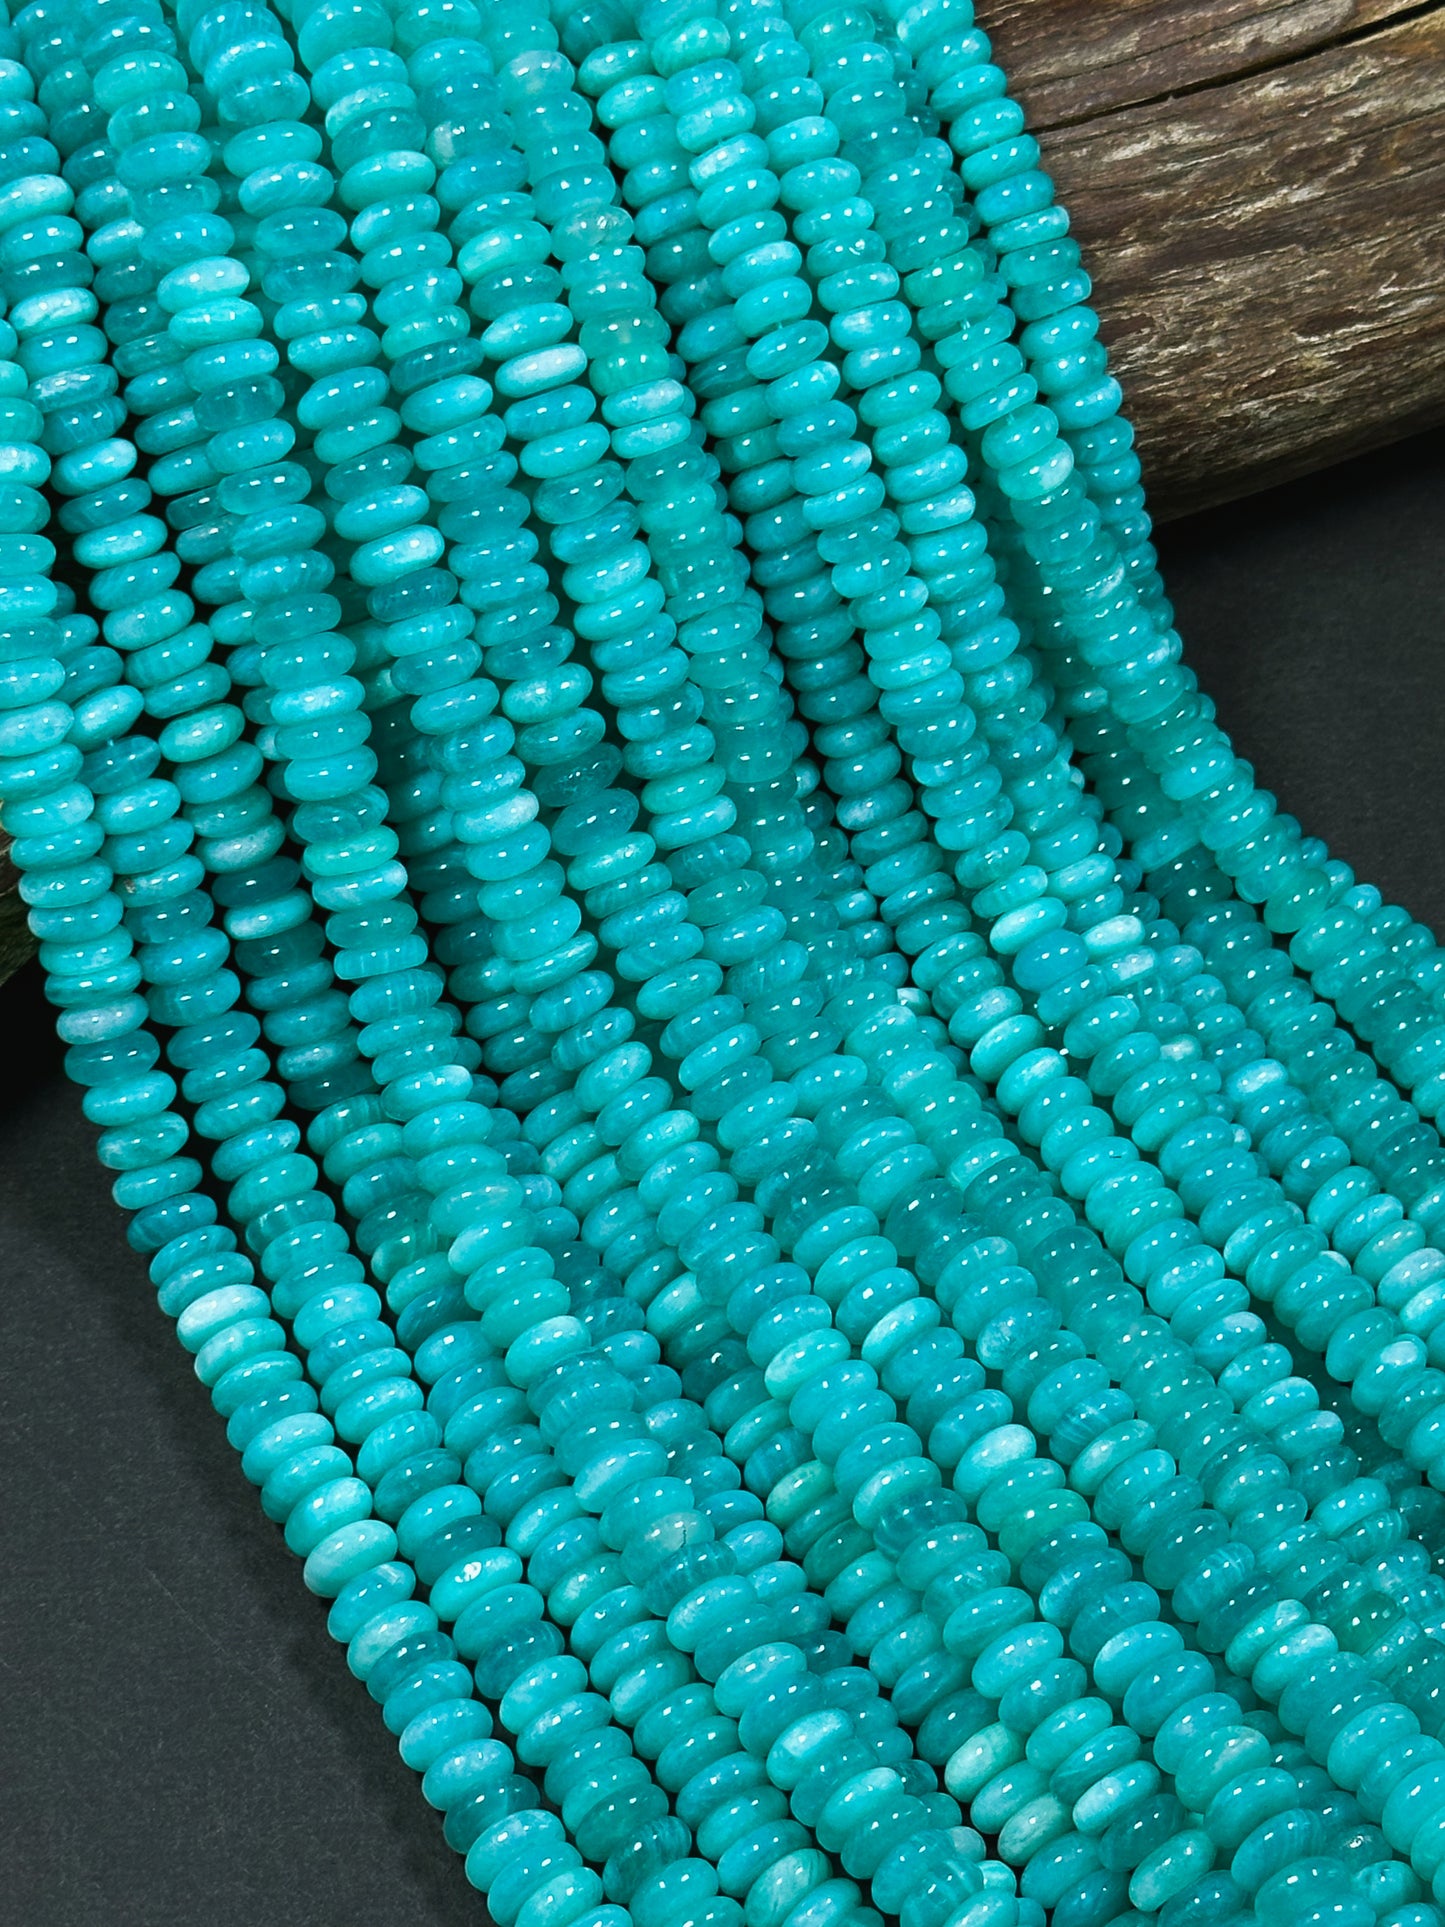 AAA Natural Amazonite Gemstone Bead 8x4mm Rondelle Shape, Beautiful Natural Blue Green Amazonite Beads, Excellent Quality Full Strand 15.5"